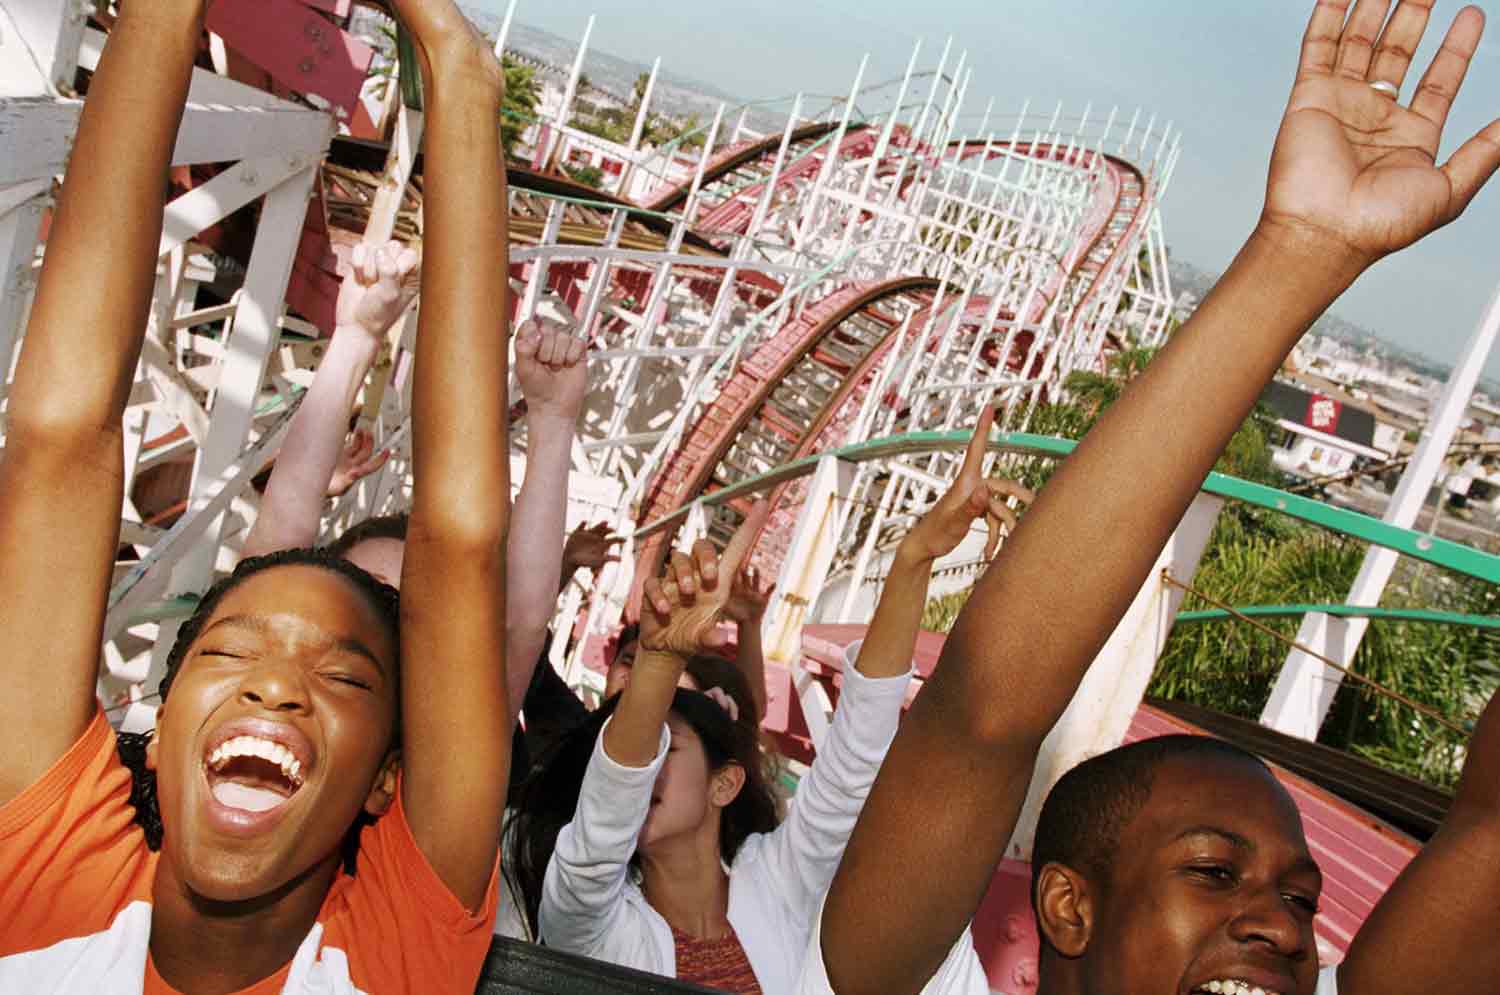 Teens ride a roller coaster with their arms raised.